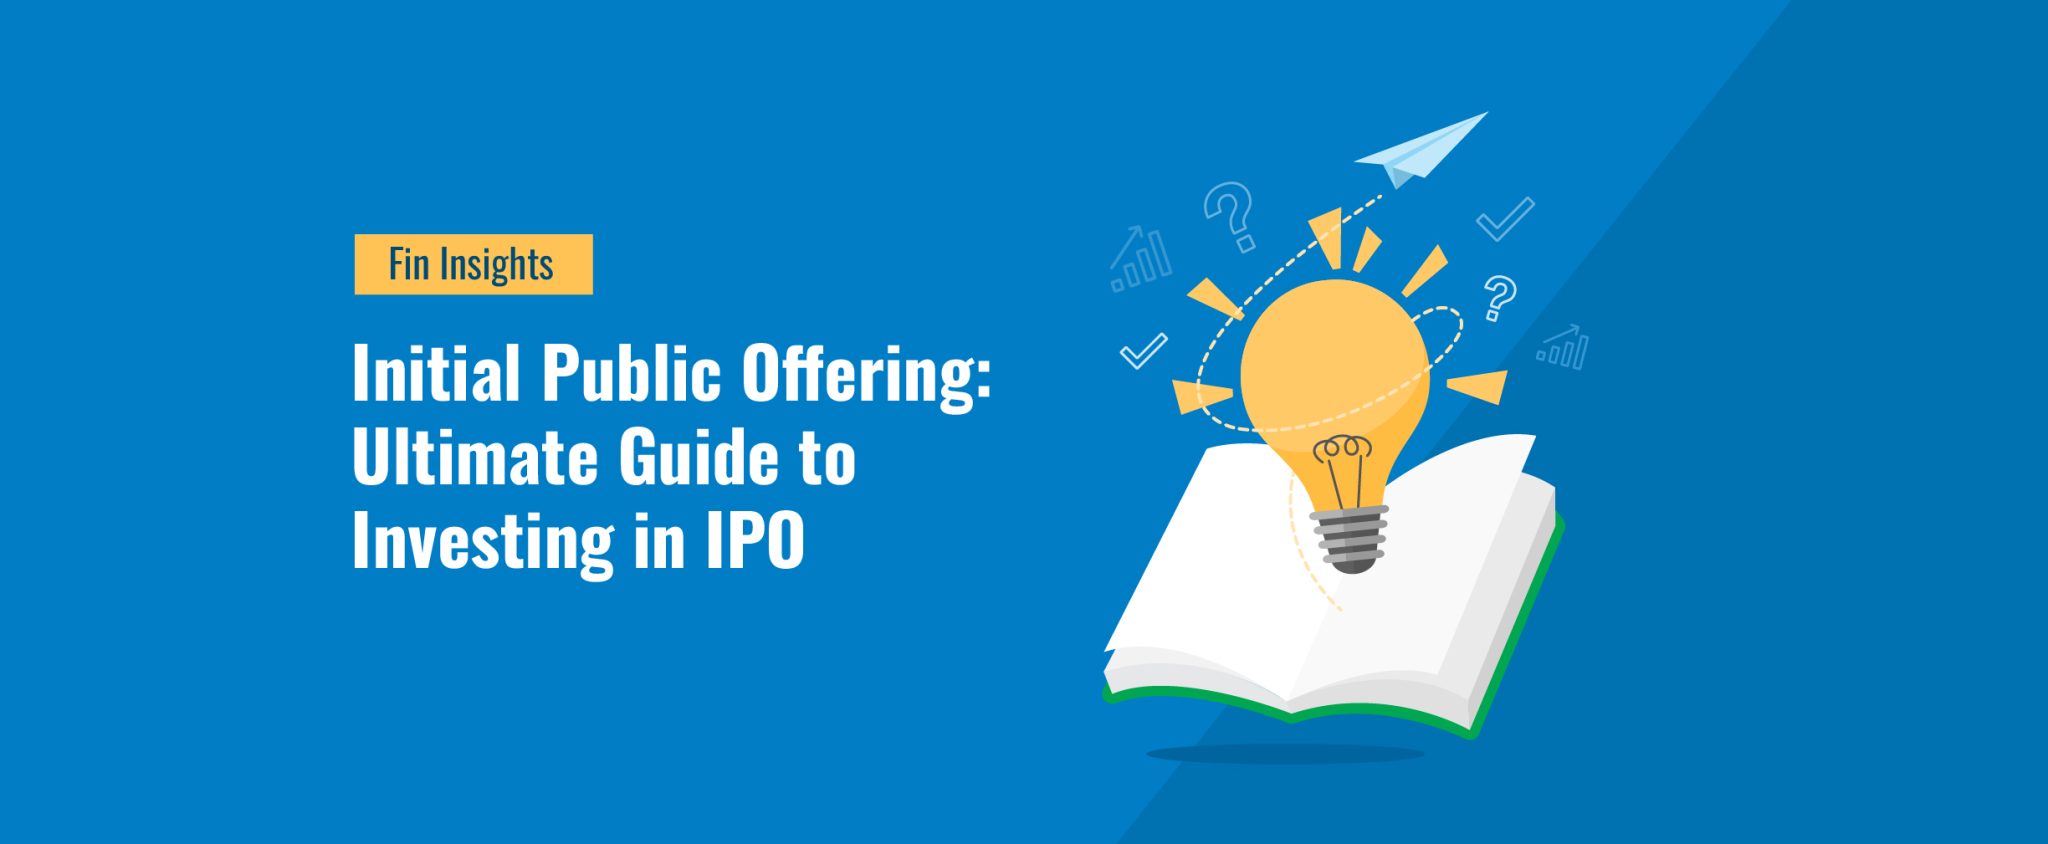 Initial Public Offering: Ultimate Guide to Investing in IPO